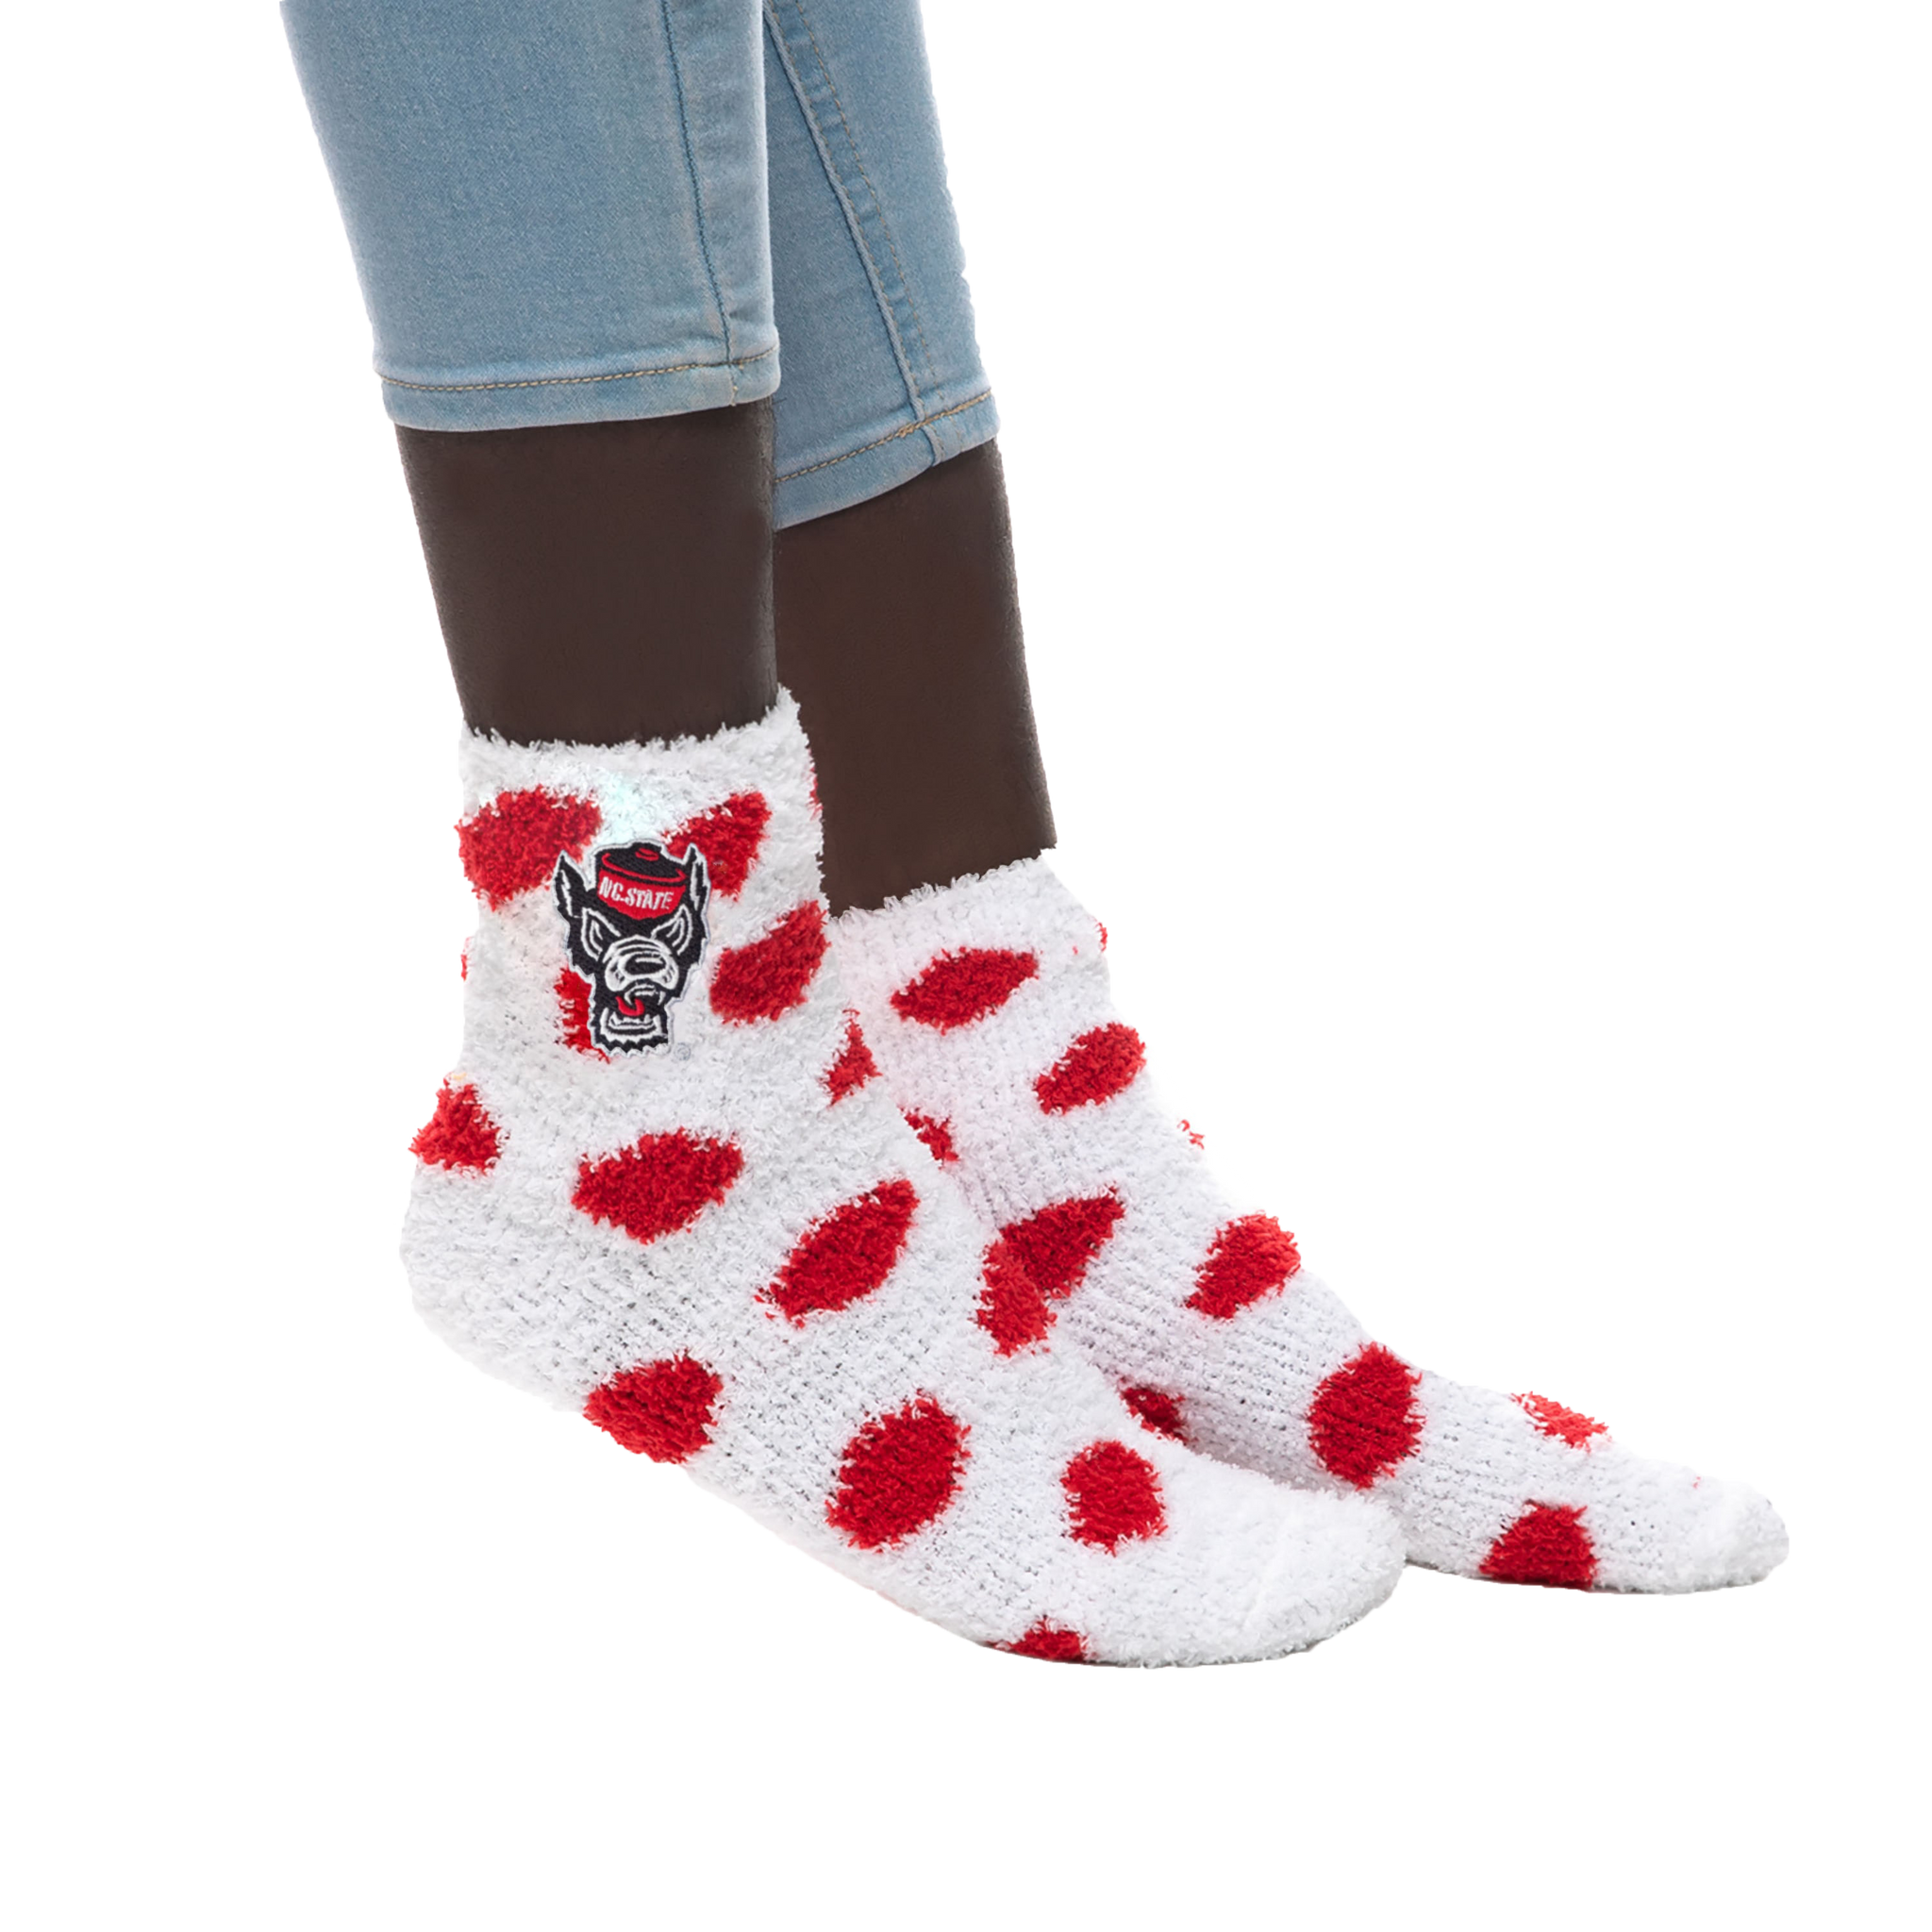 NC State Wolfpack White and Red Polka Dot Wolfhead Fuzzy Socks